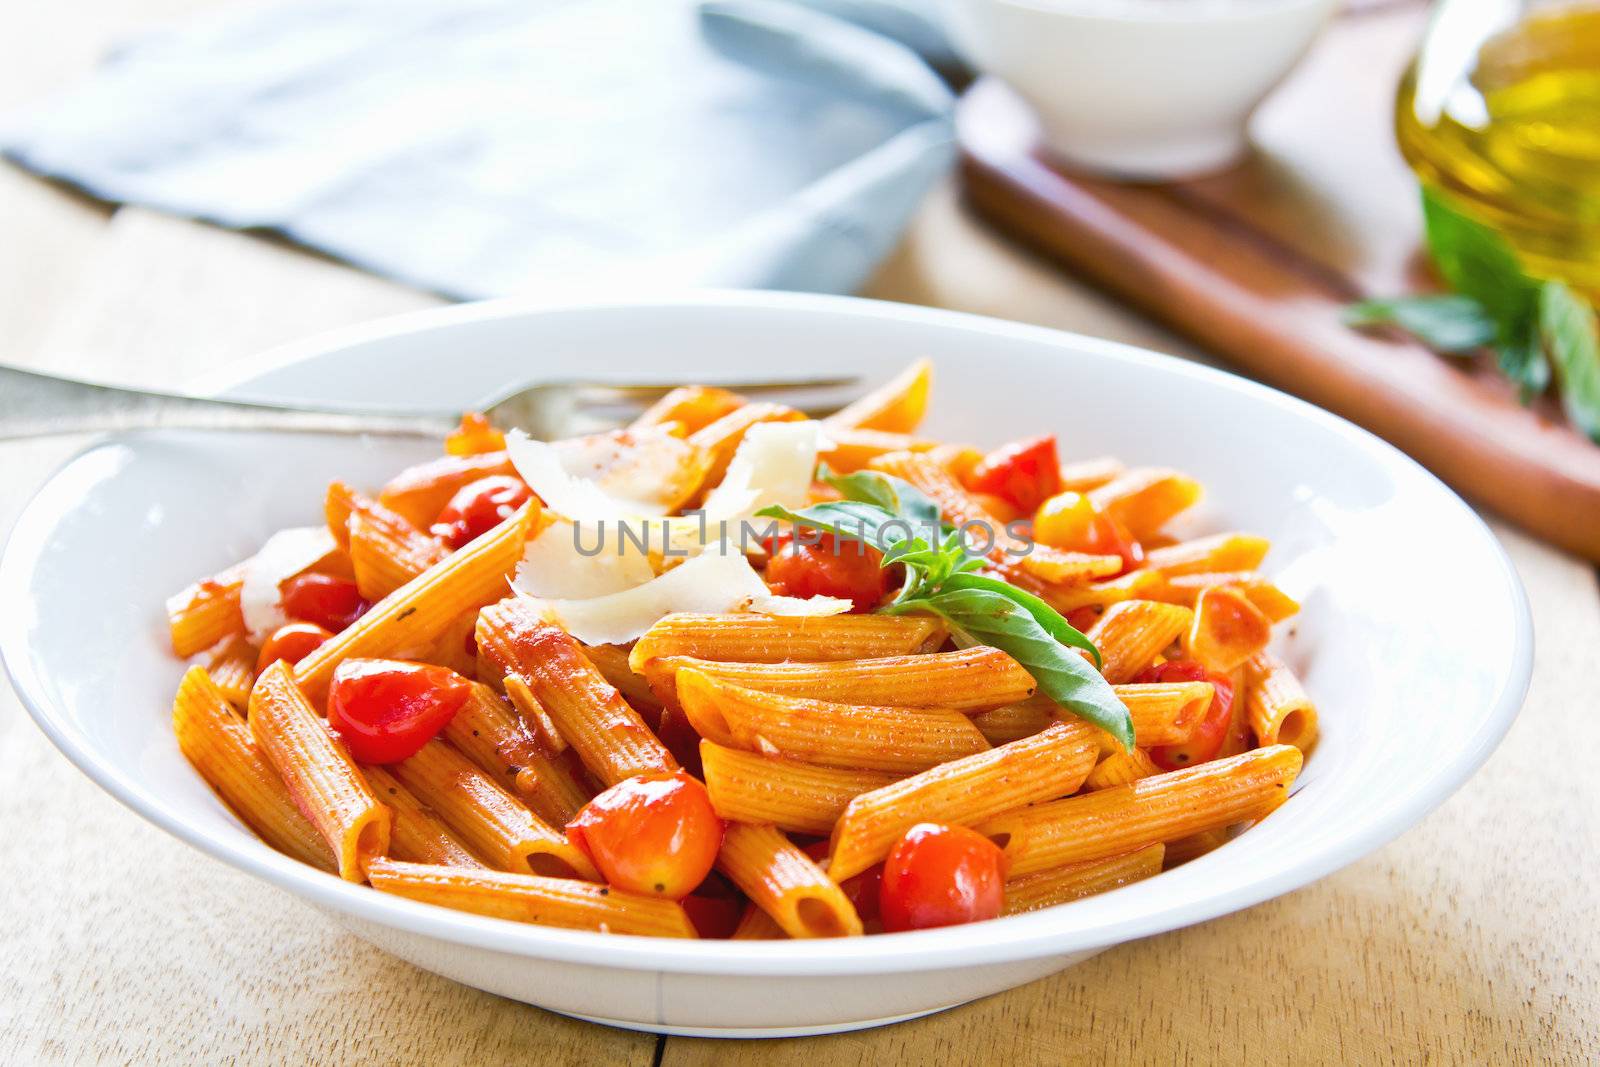 Penne with tomato sauce and shaving Parmesan on top